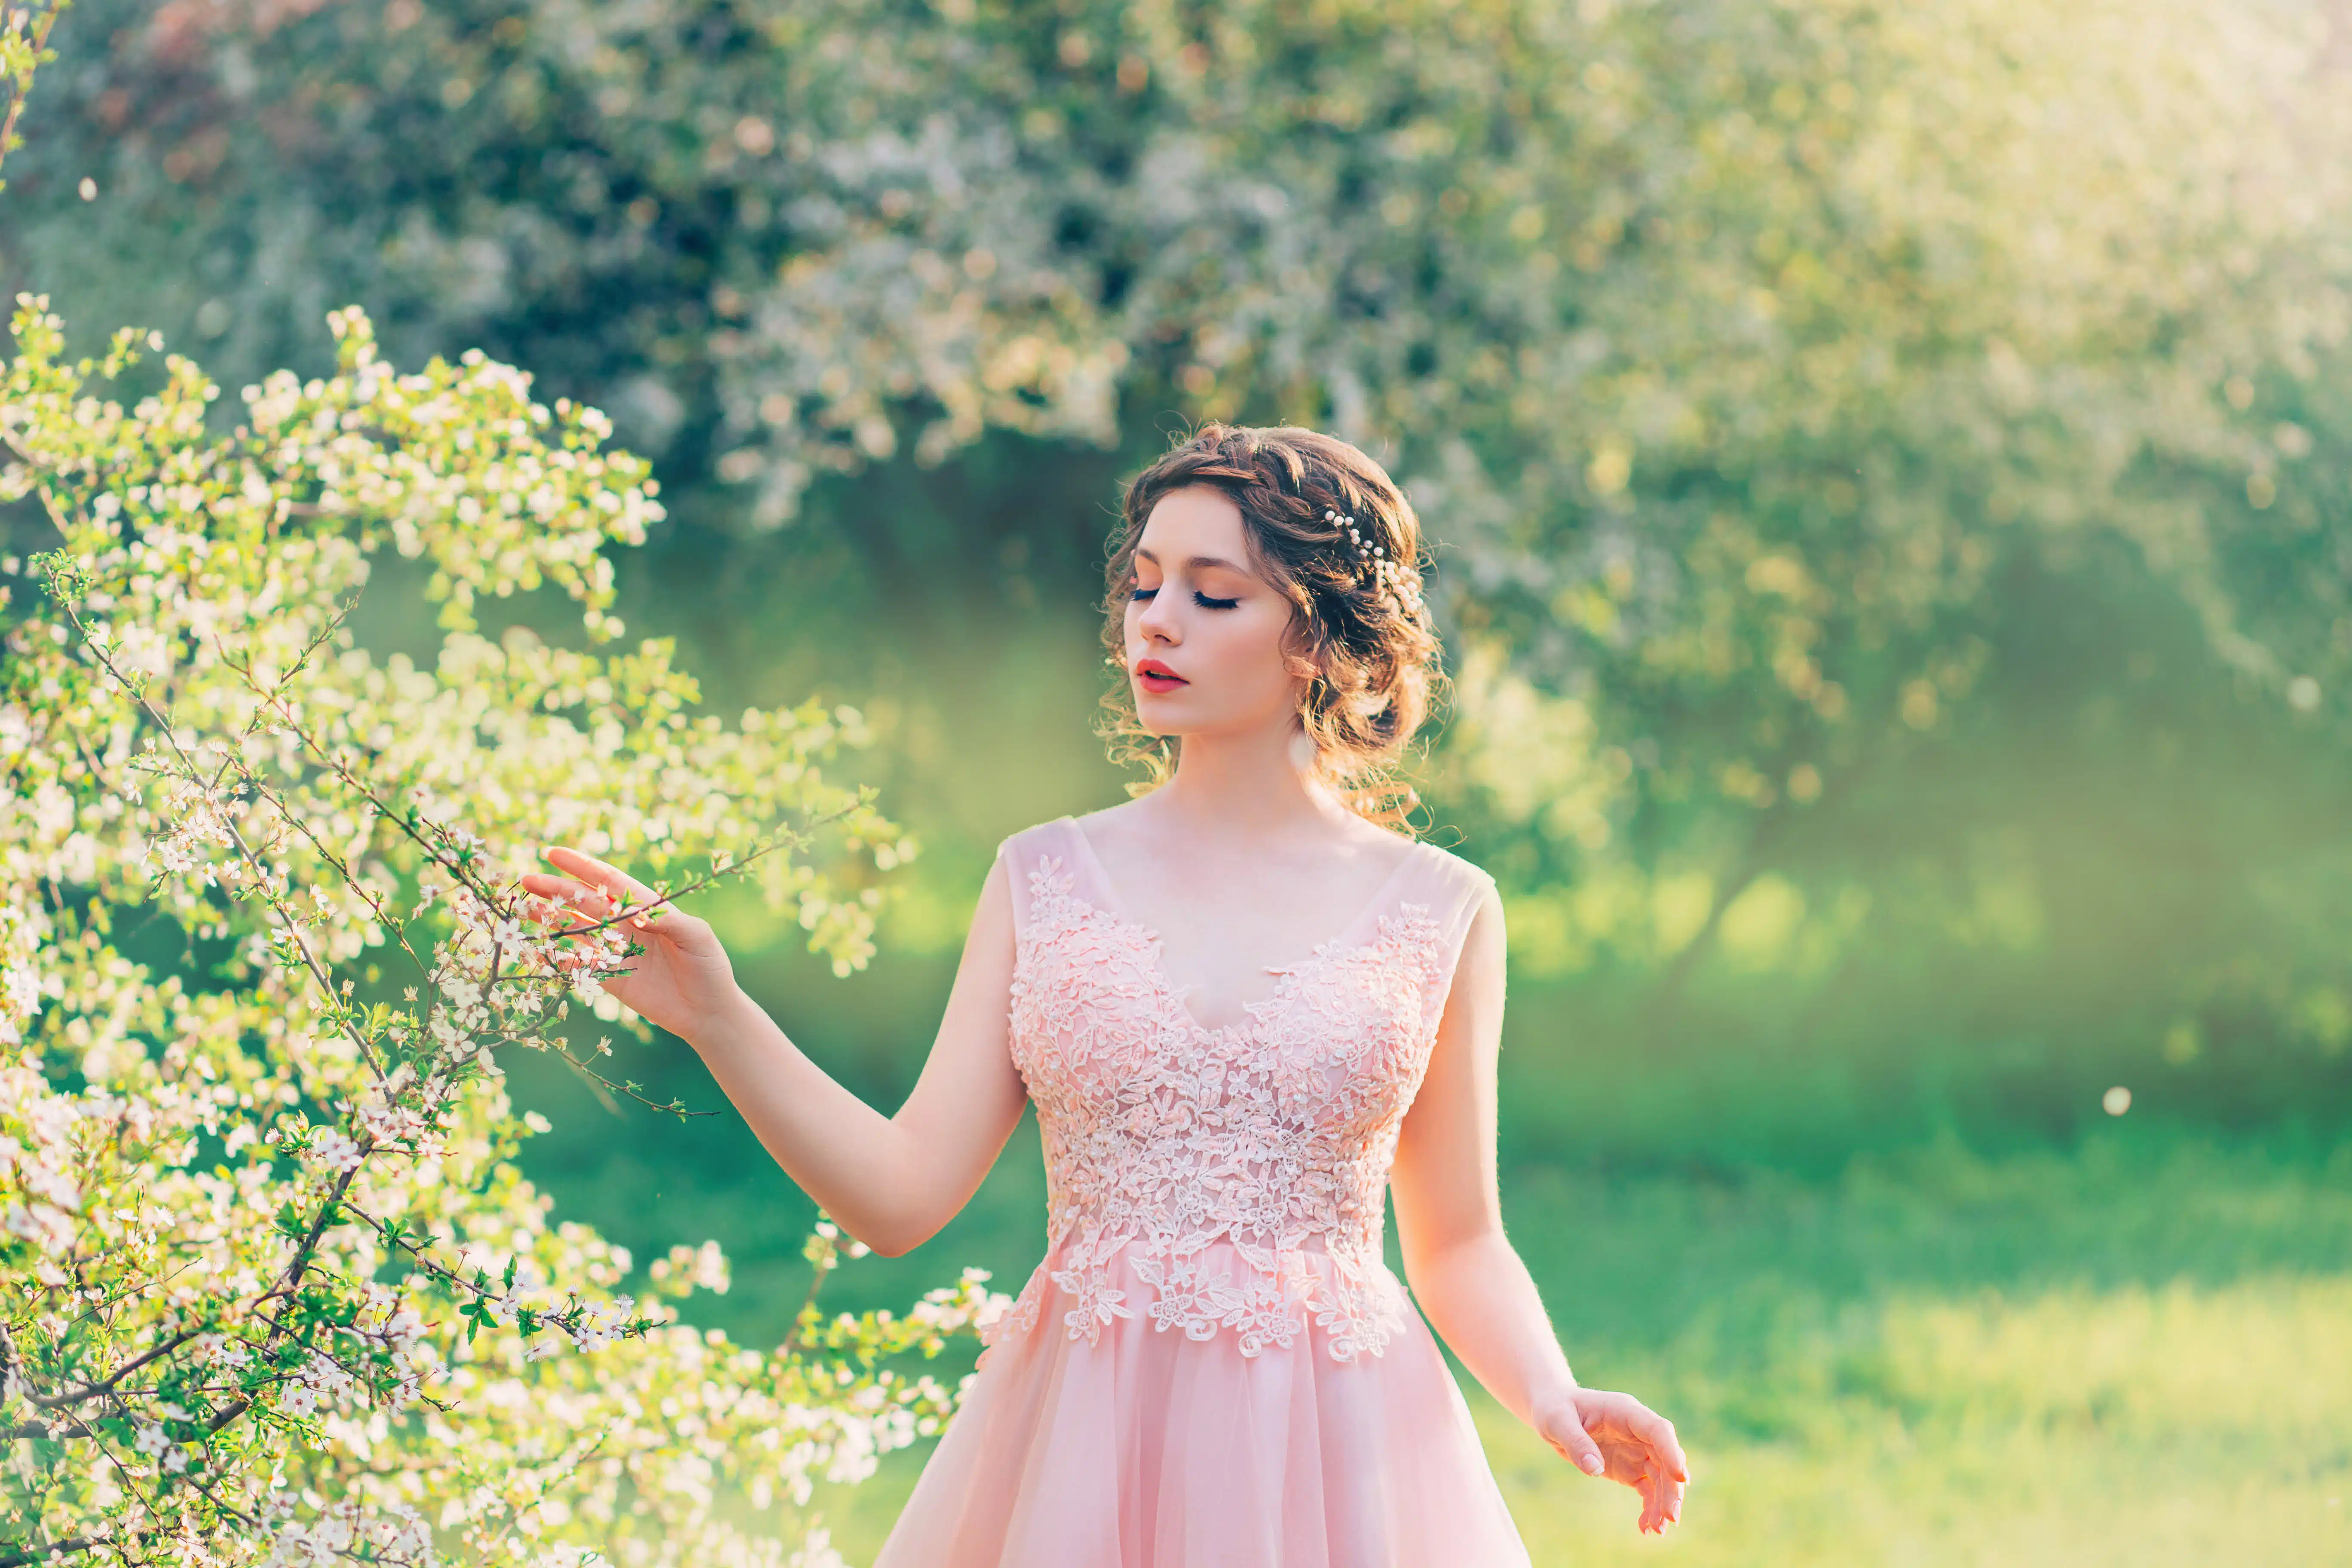 charming lady in blooming garden, girl with gathered hair gently strokes branches of trees with flowers, porcelain doll with bright red cute lips in pink dress, image of spring nymph, creative colors